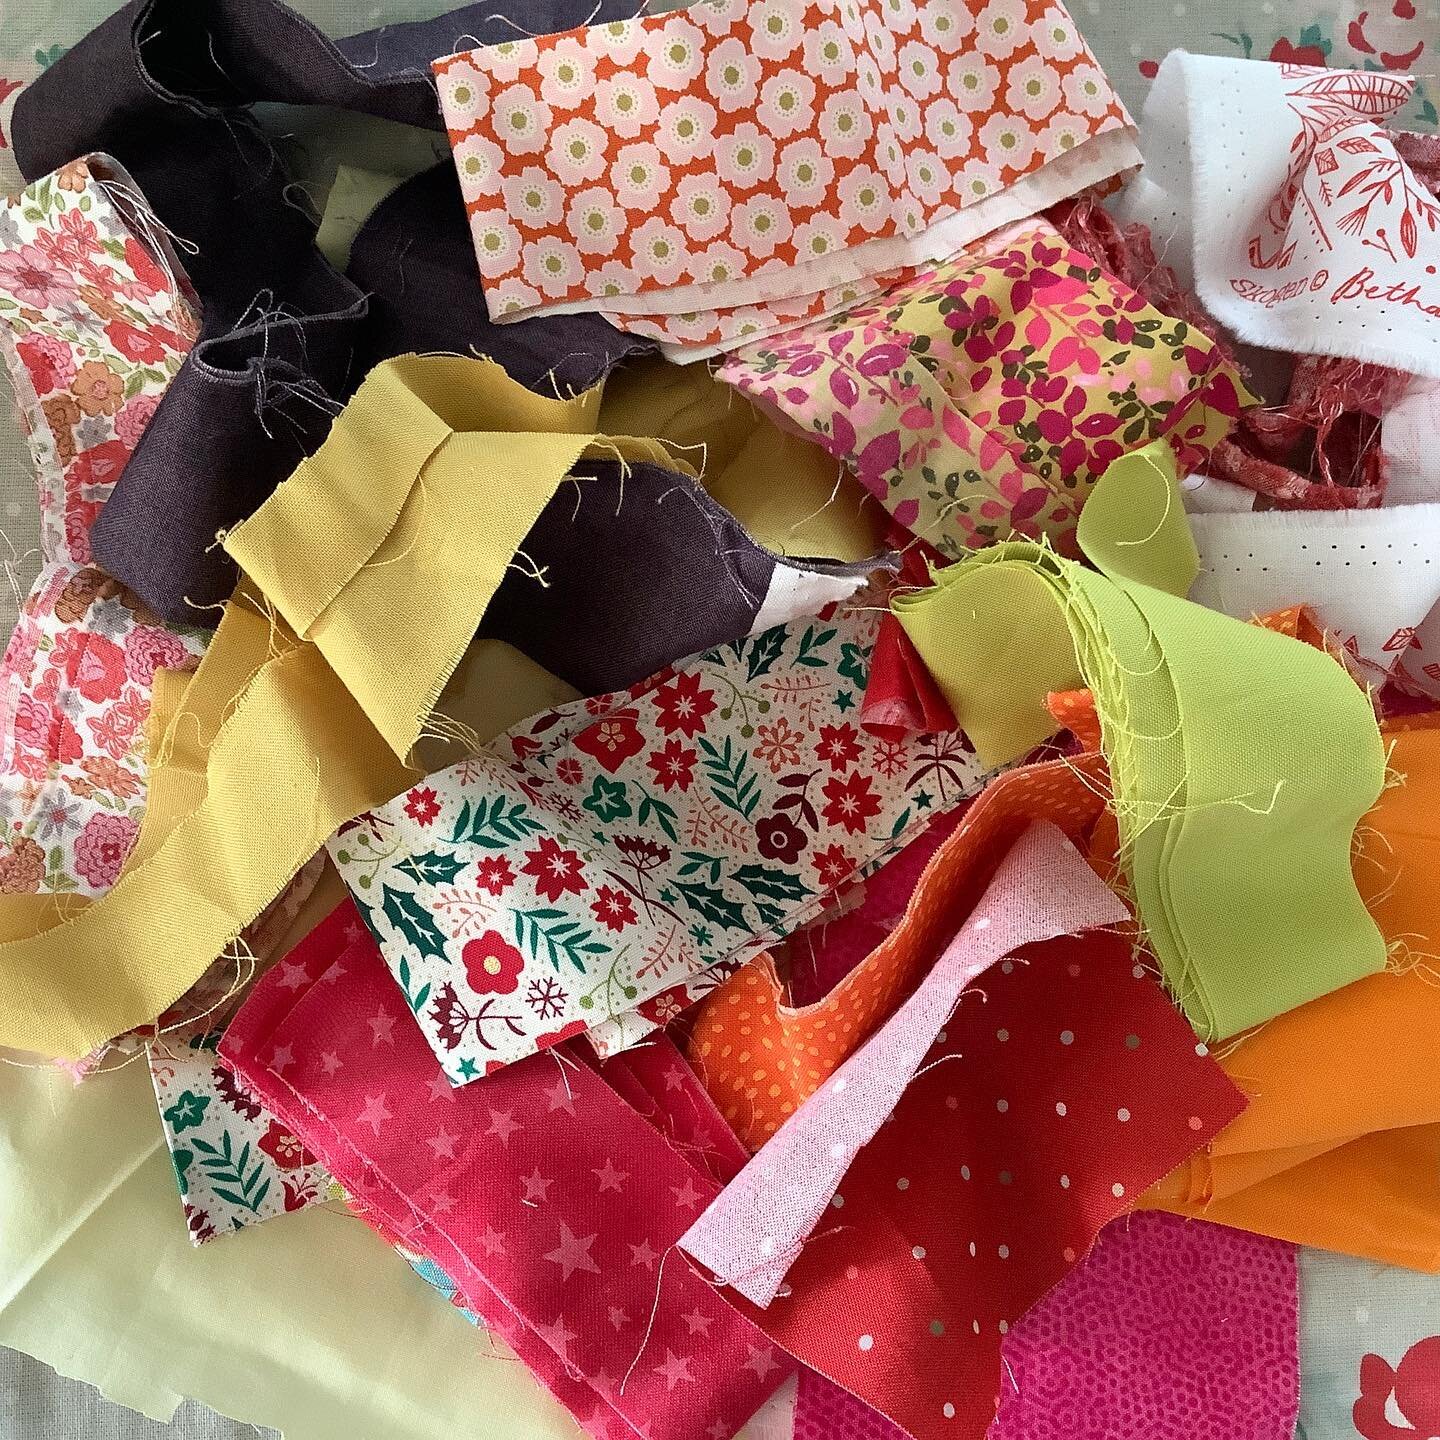 Preview of what&rsquo;s happening at Hometown this afternoon. From tiny scraps to luscious quilts..

Why don&rsquo;t you sign up for a class at Hometown and your workstation could also be this colourful? ✂️

#hometownworkshop #scrapquilt #scrapquilti